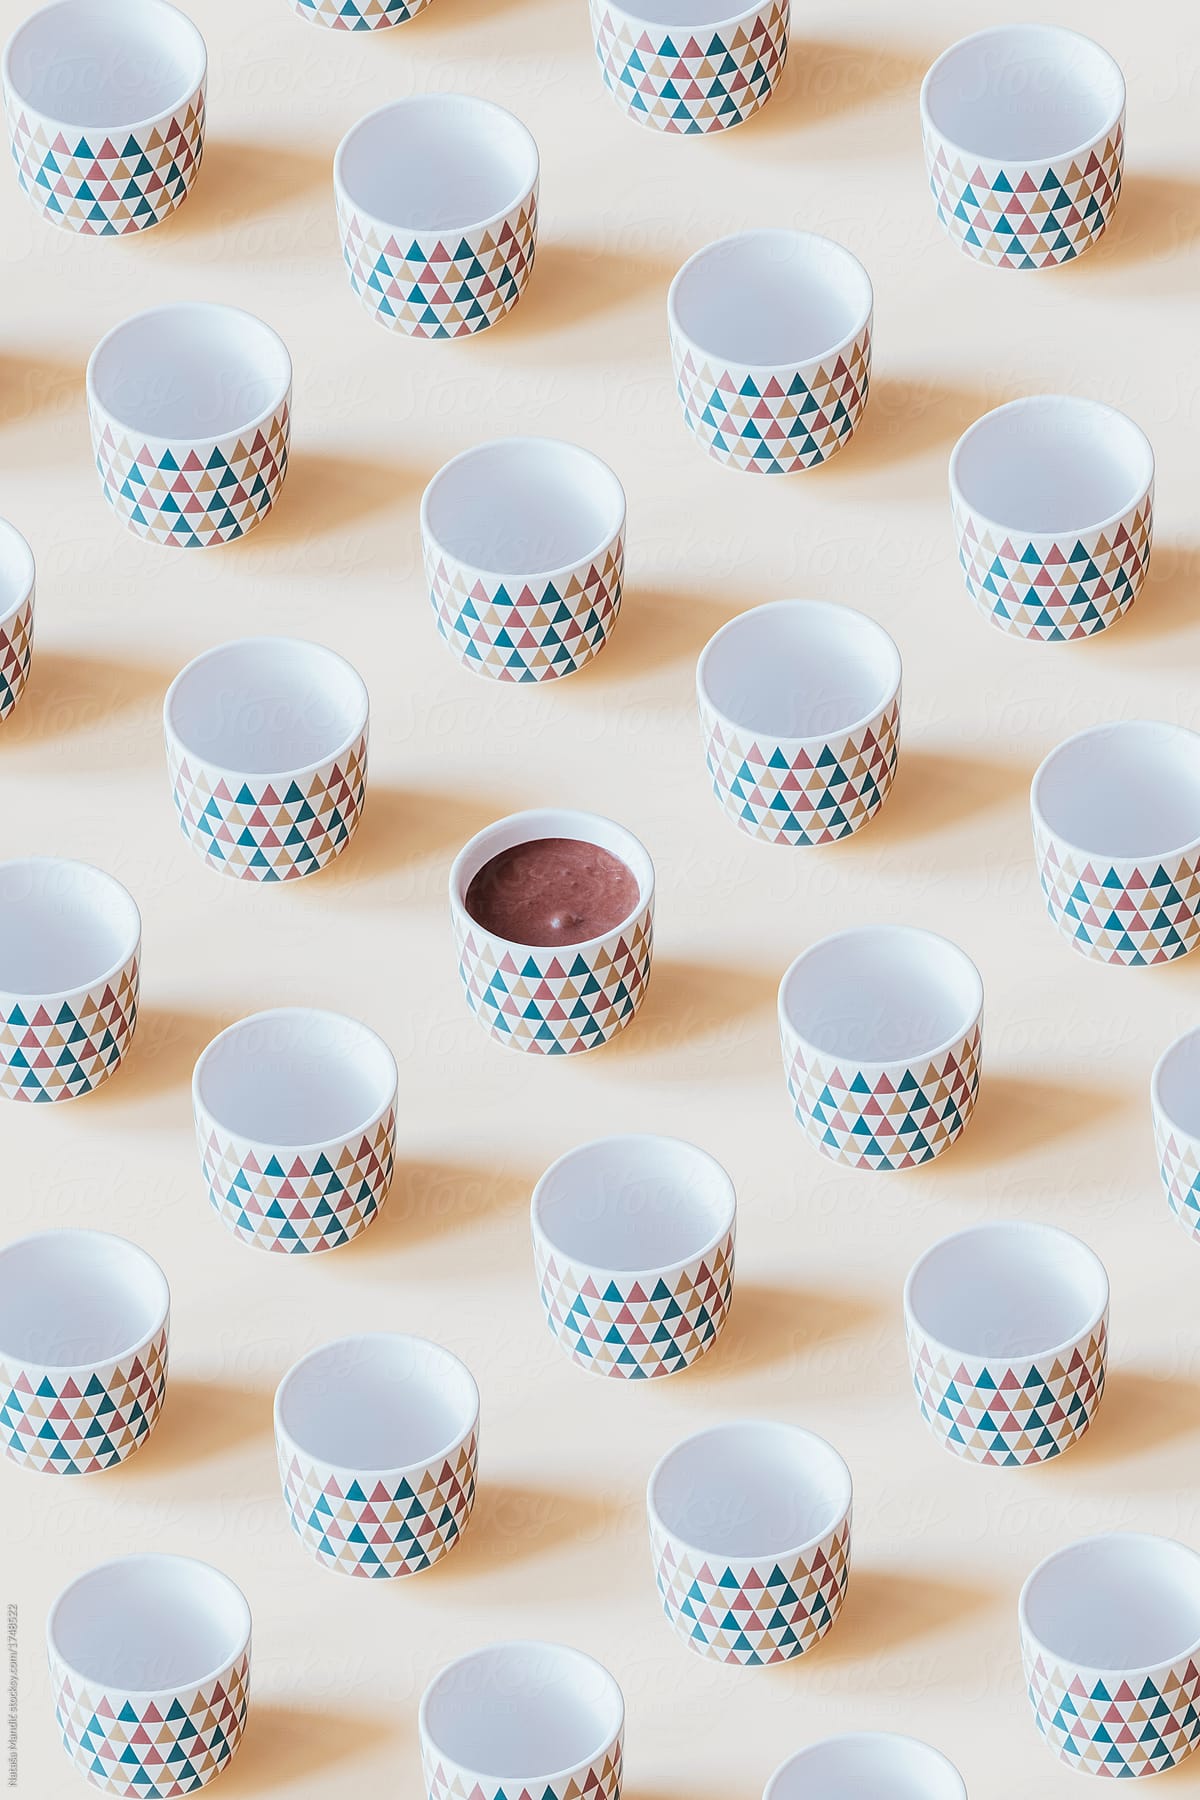 Pattern of empty mugs with just one mug with chocolate